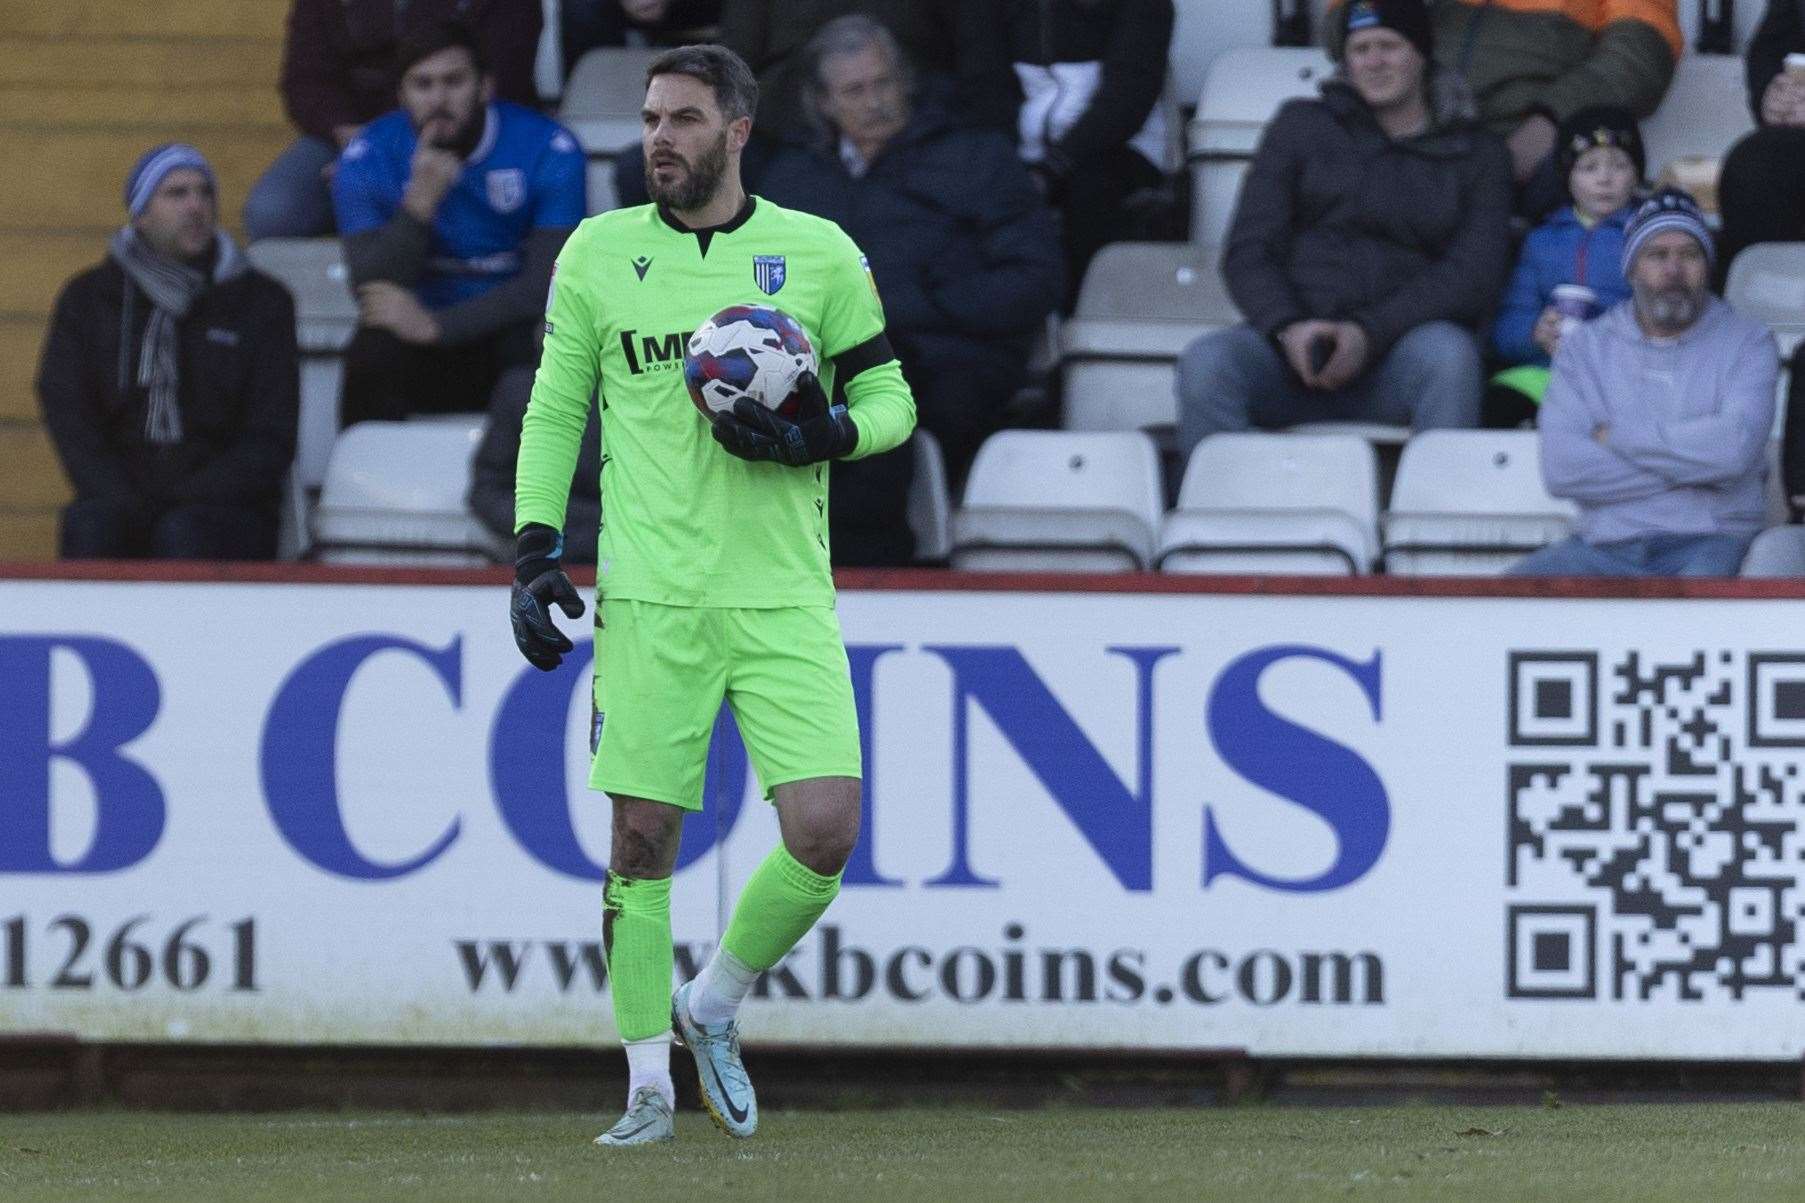 Glenn Morris is back at Gillingham after cancelling his contract at Crawley